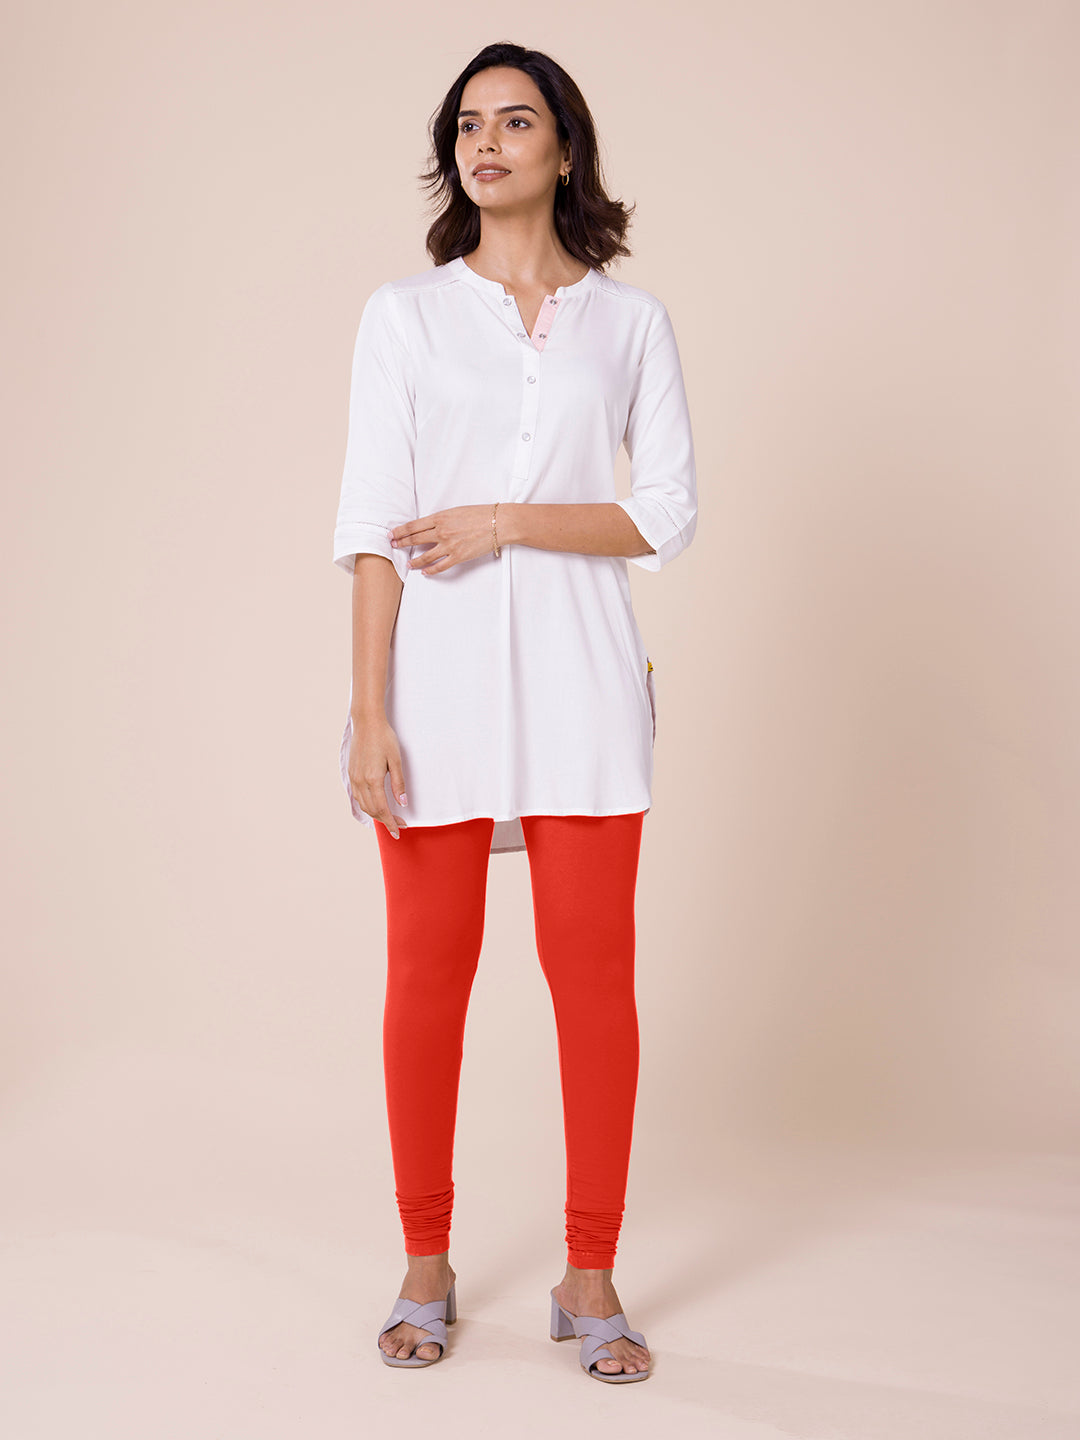 Go Colors Girls Legging at Rs 300/piece, Kids Jeggings in Chennai